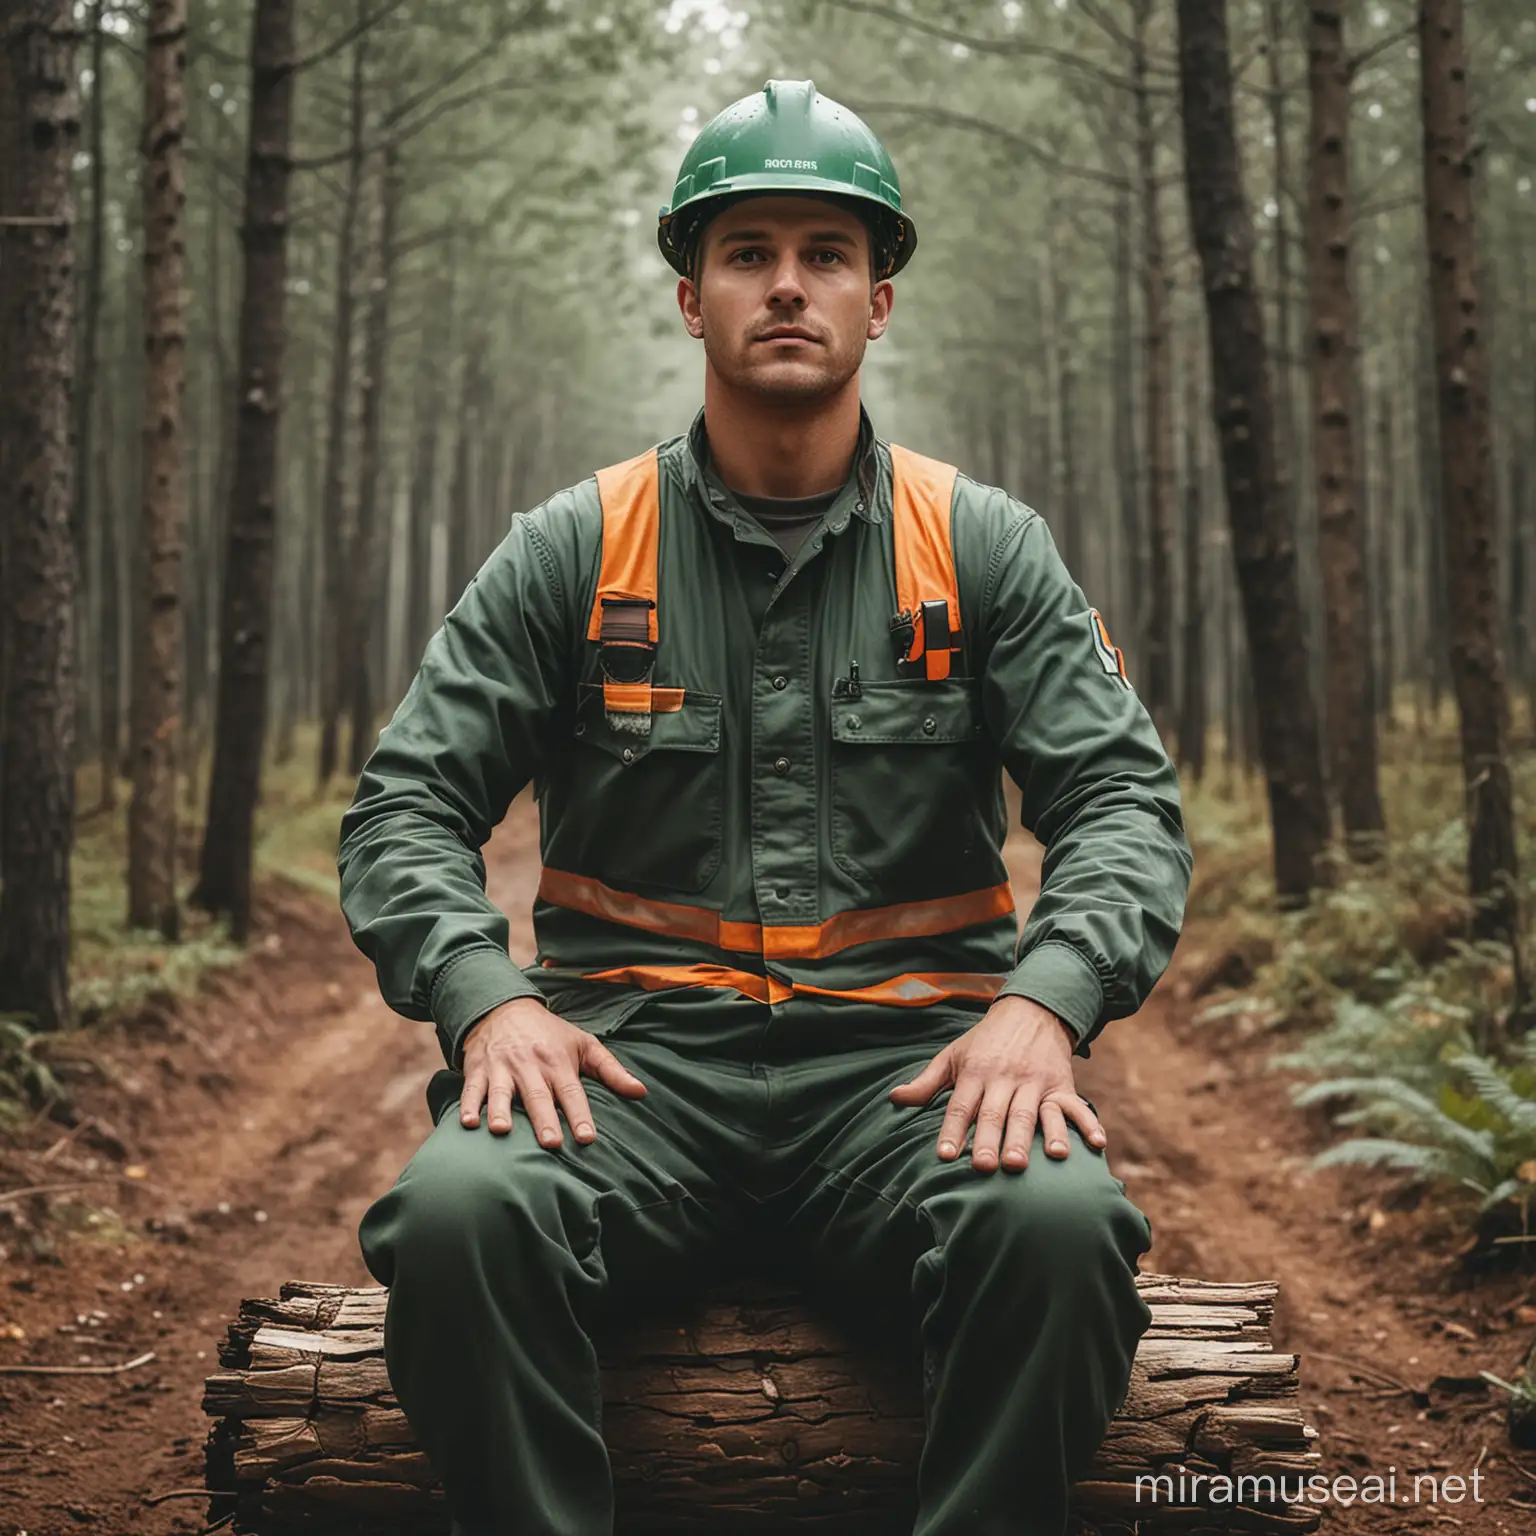 Create an image of a forest worker with the back straight, sitting with the two hands below shoulder level